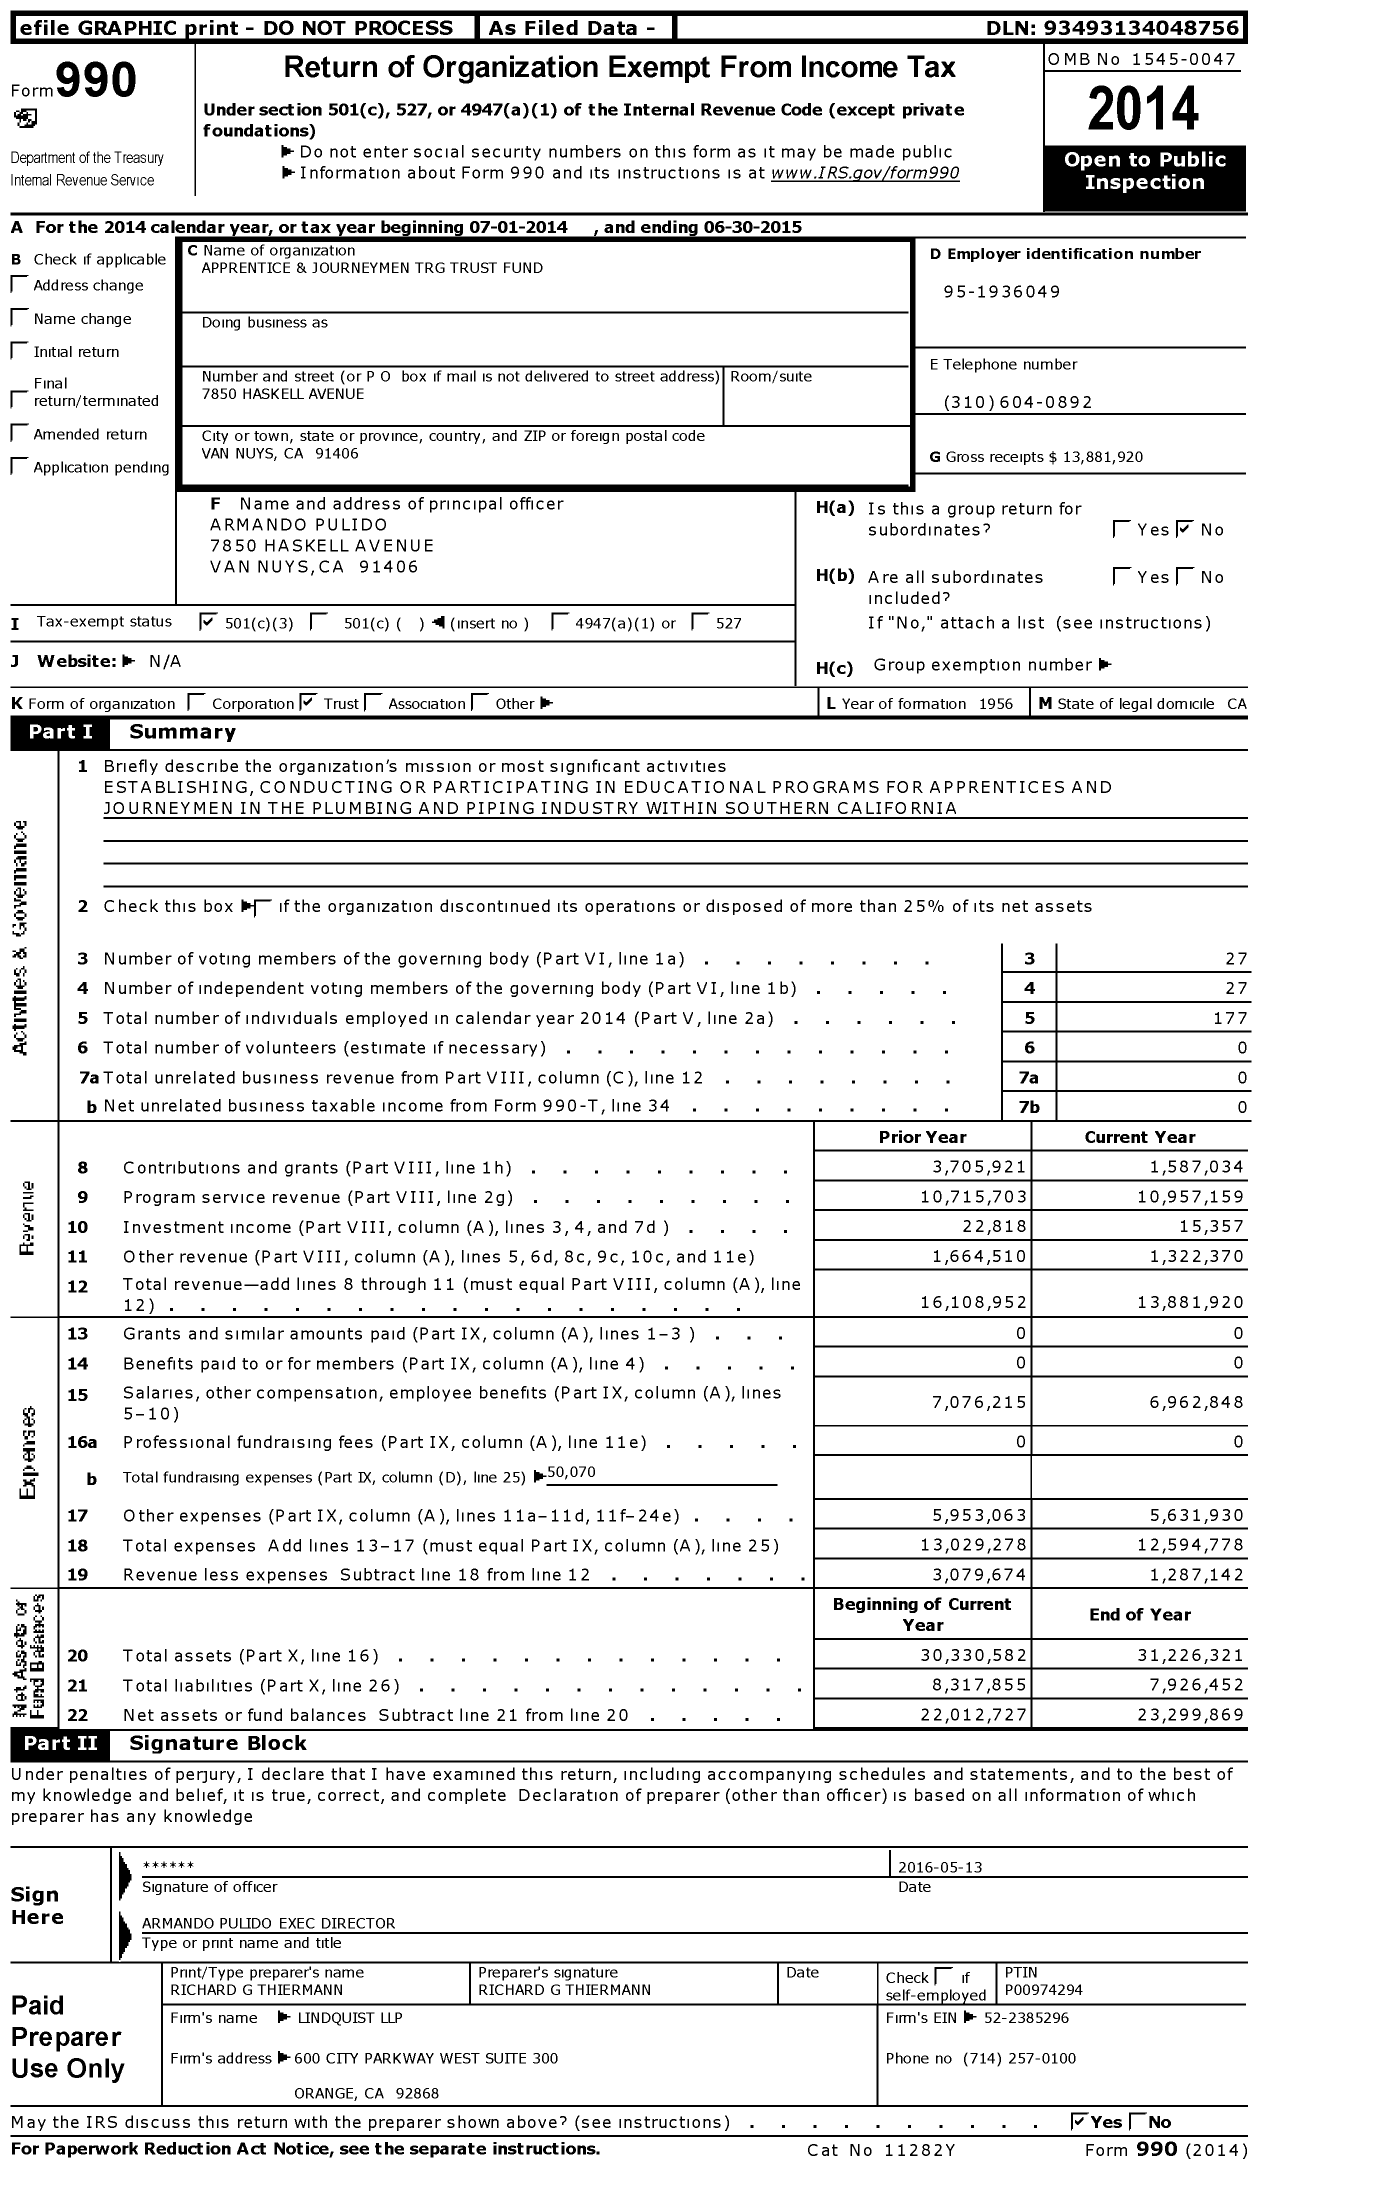 Image of first page of 2014 Form 990 for Apprentice & Journeyman TRG Trust Fund